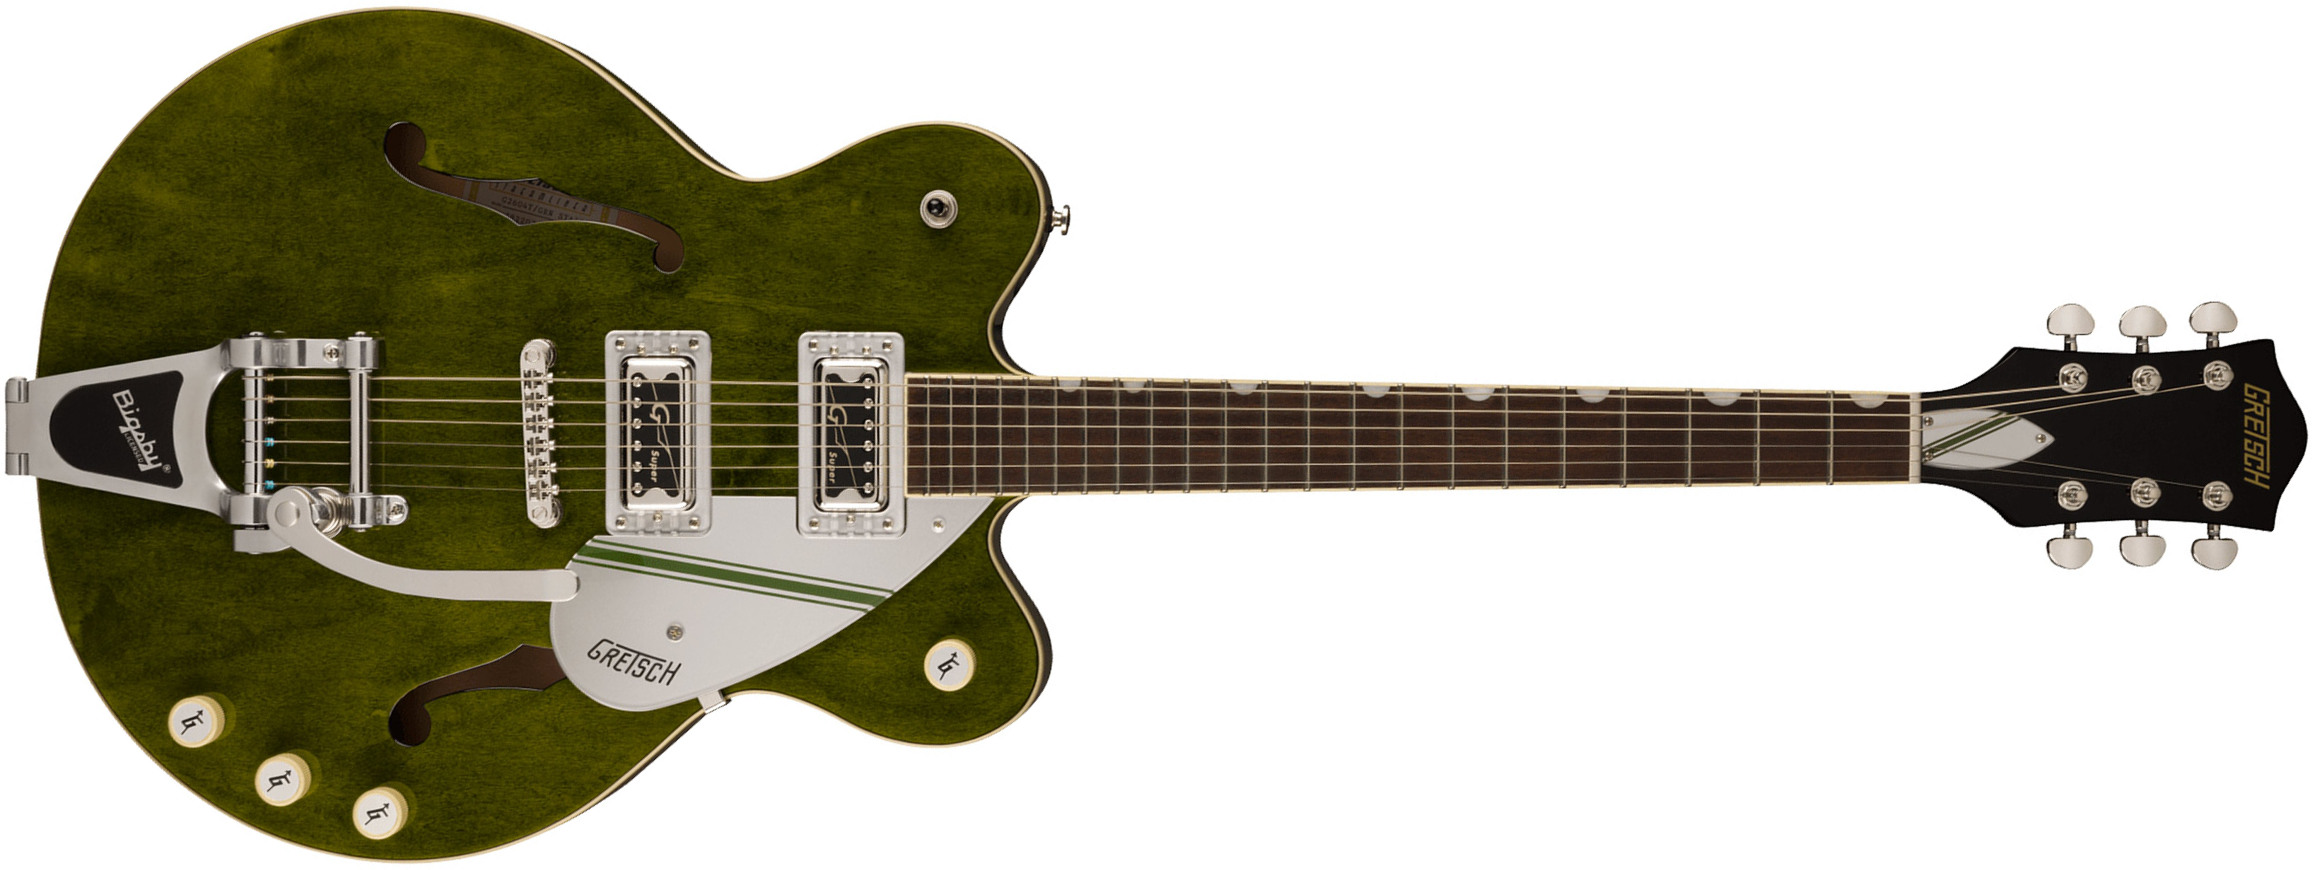 Gretsch G2604t Streamliner Rally Ii Center Block Dc Bigsby 2h Trem Lau - Rally Green Stain - Semi-hollow electric guitar - Main picture